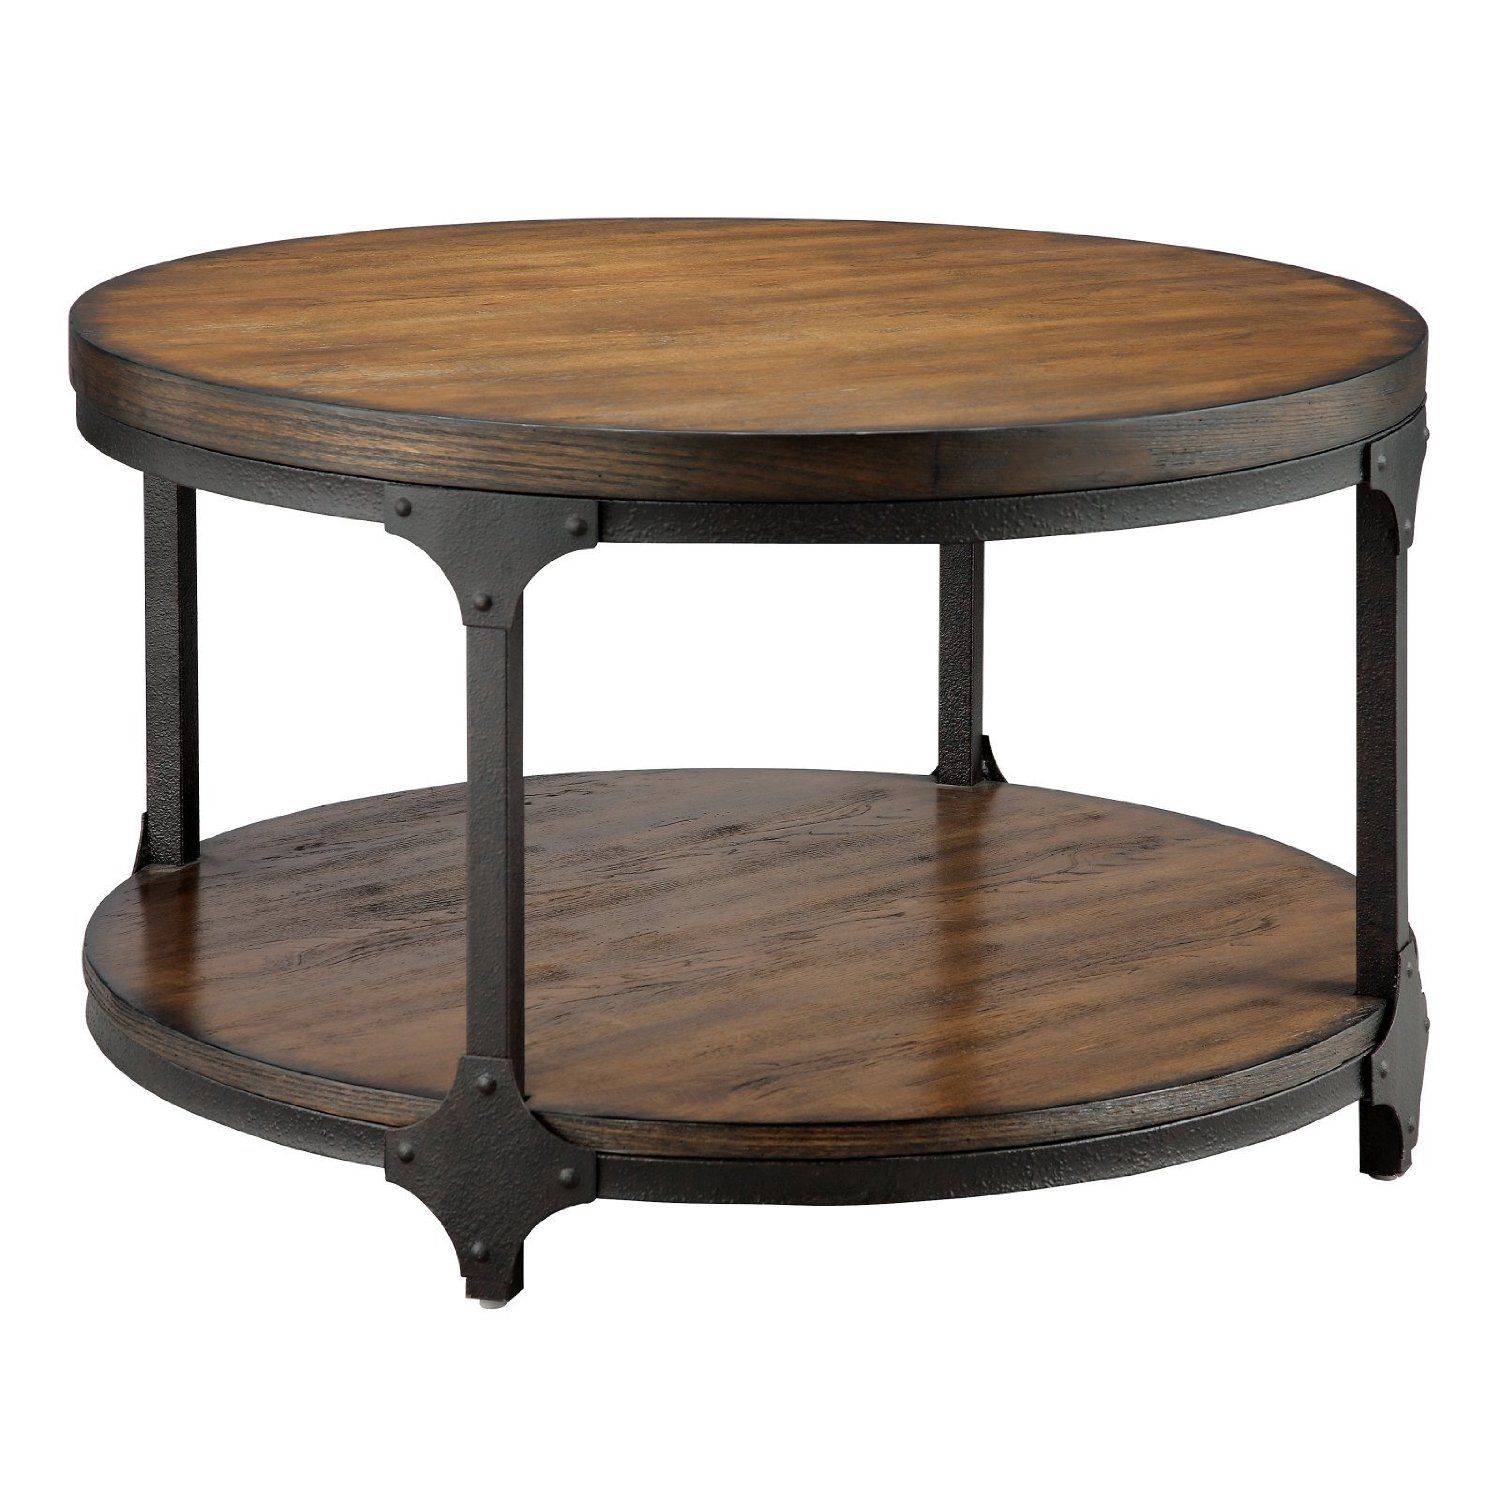 Rustic Round Coffee Table Popular Round Coffee Table Rustic Distressed Wood End Tables Rustic Sofa Tables (View 9 of 10)